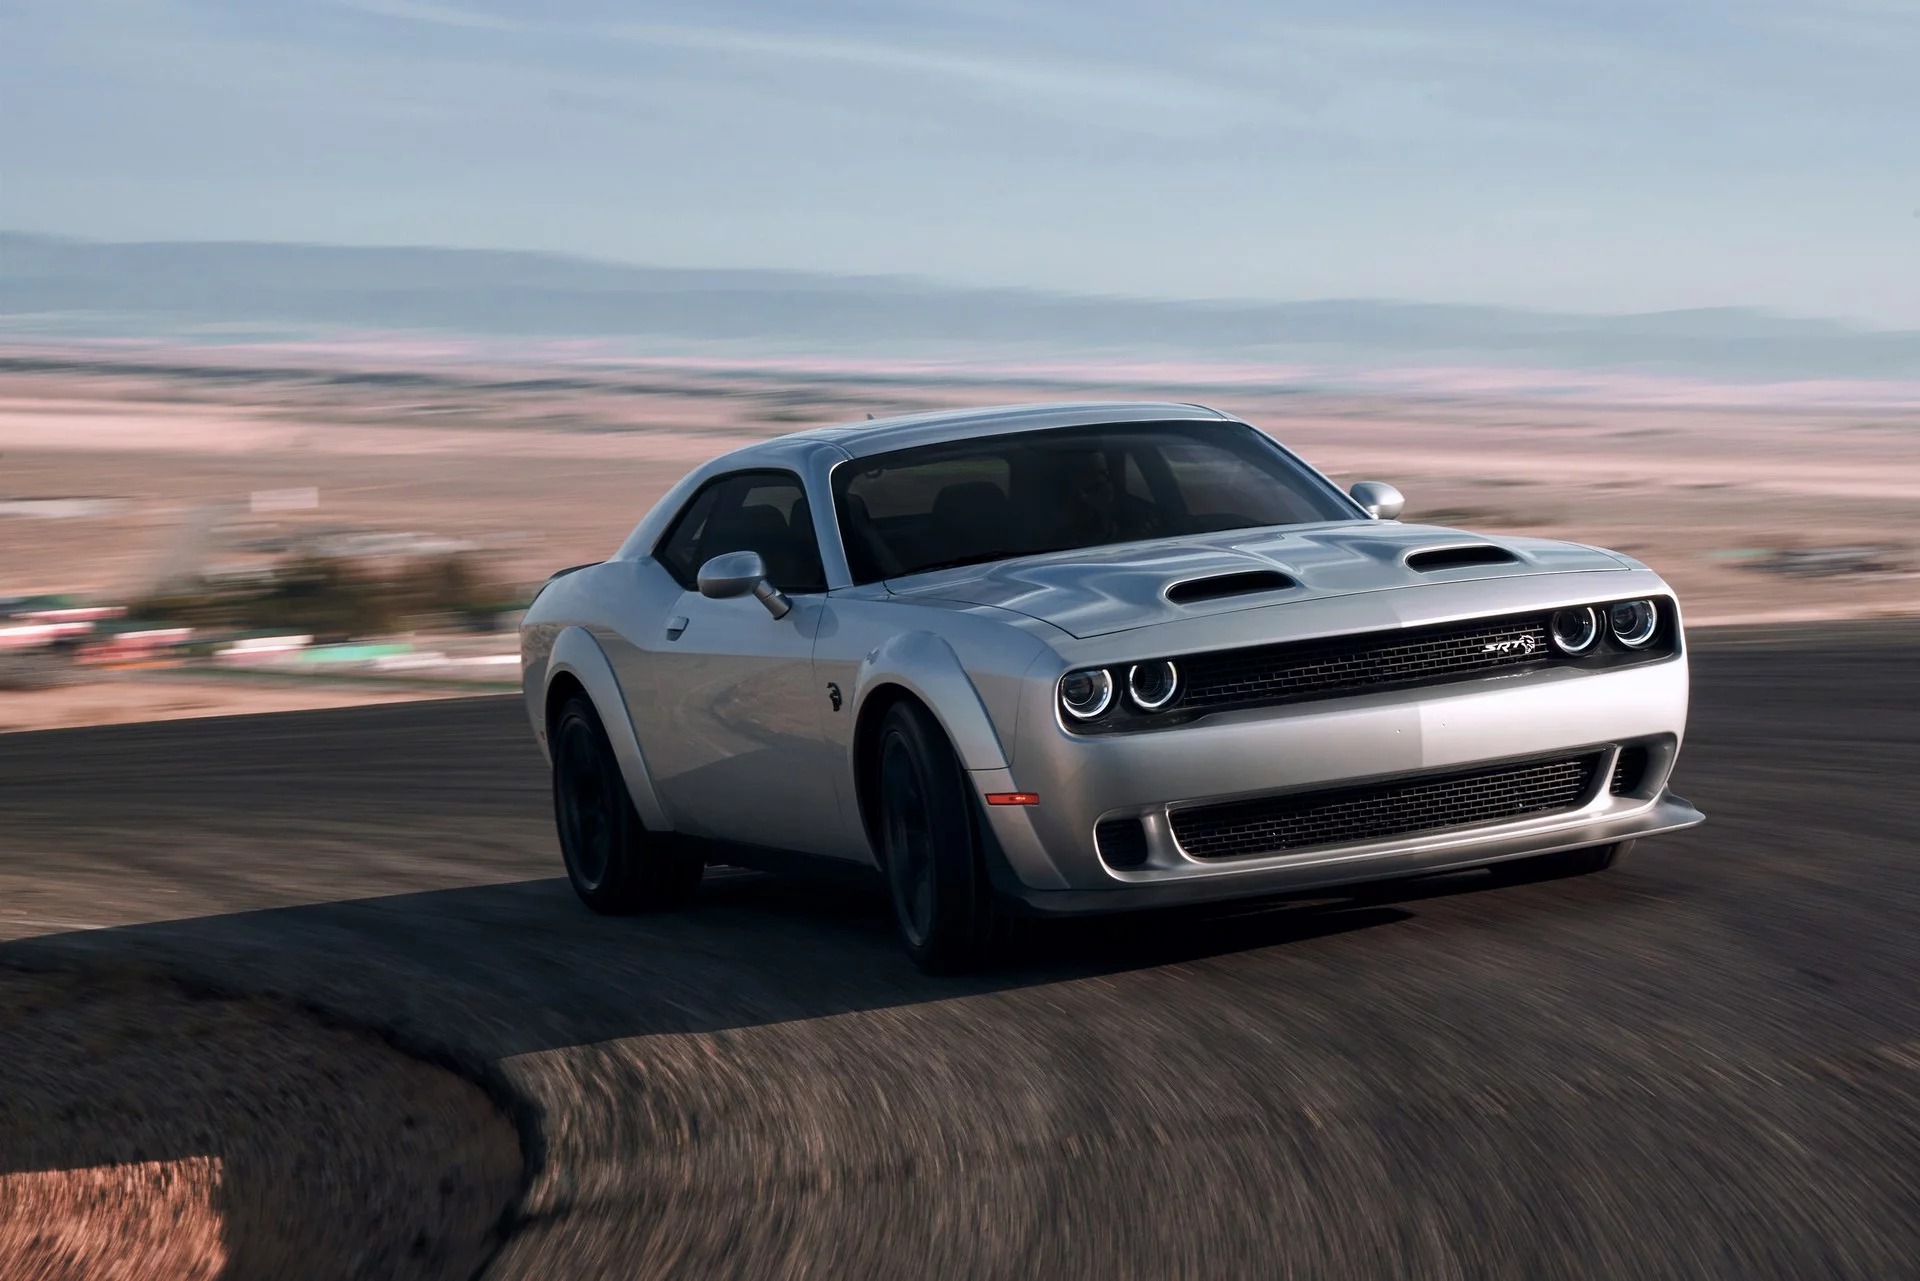 New Dodge Challenger Srt Hellcat Redeye Revealed With 797 Hp 594 Kw